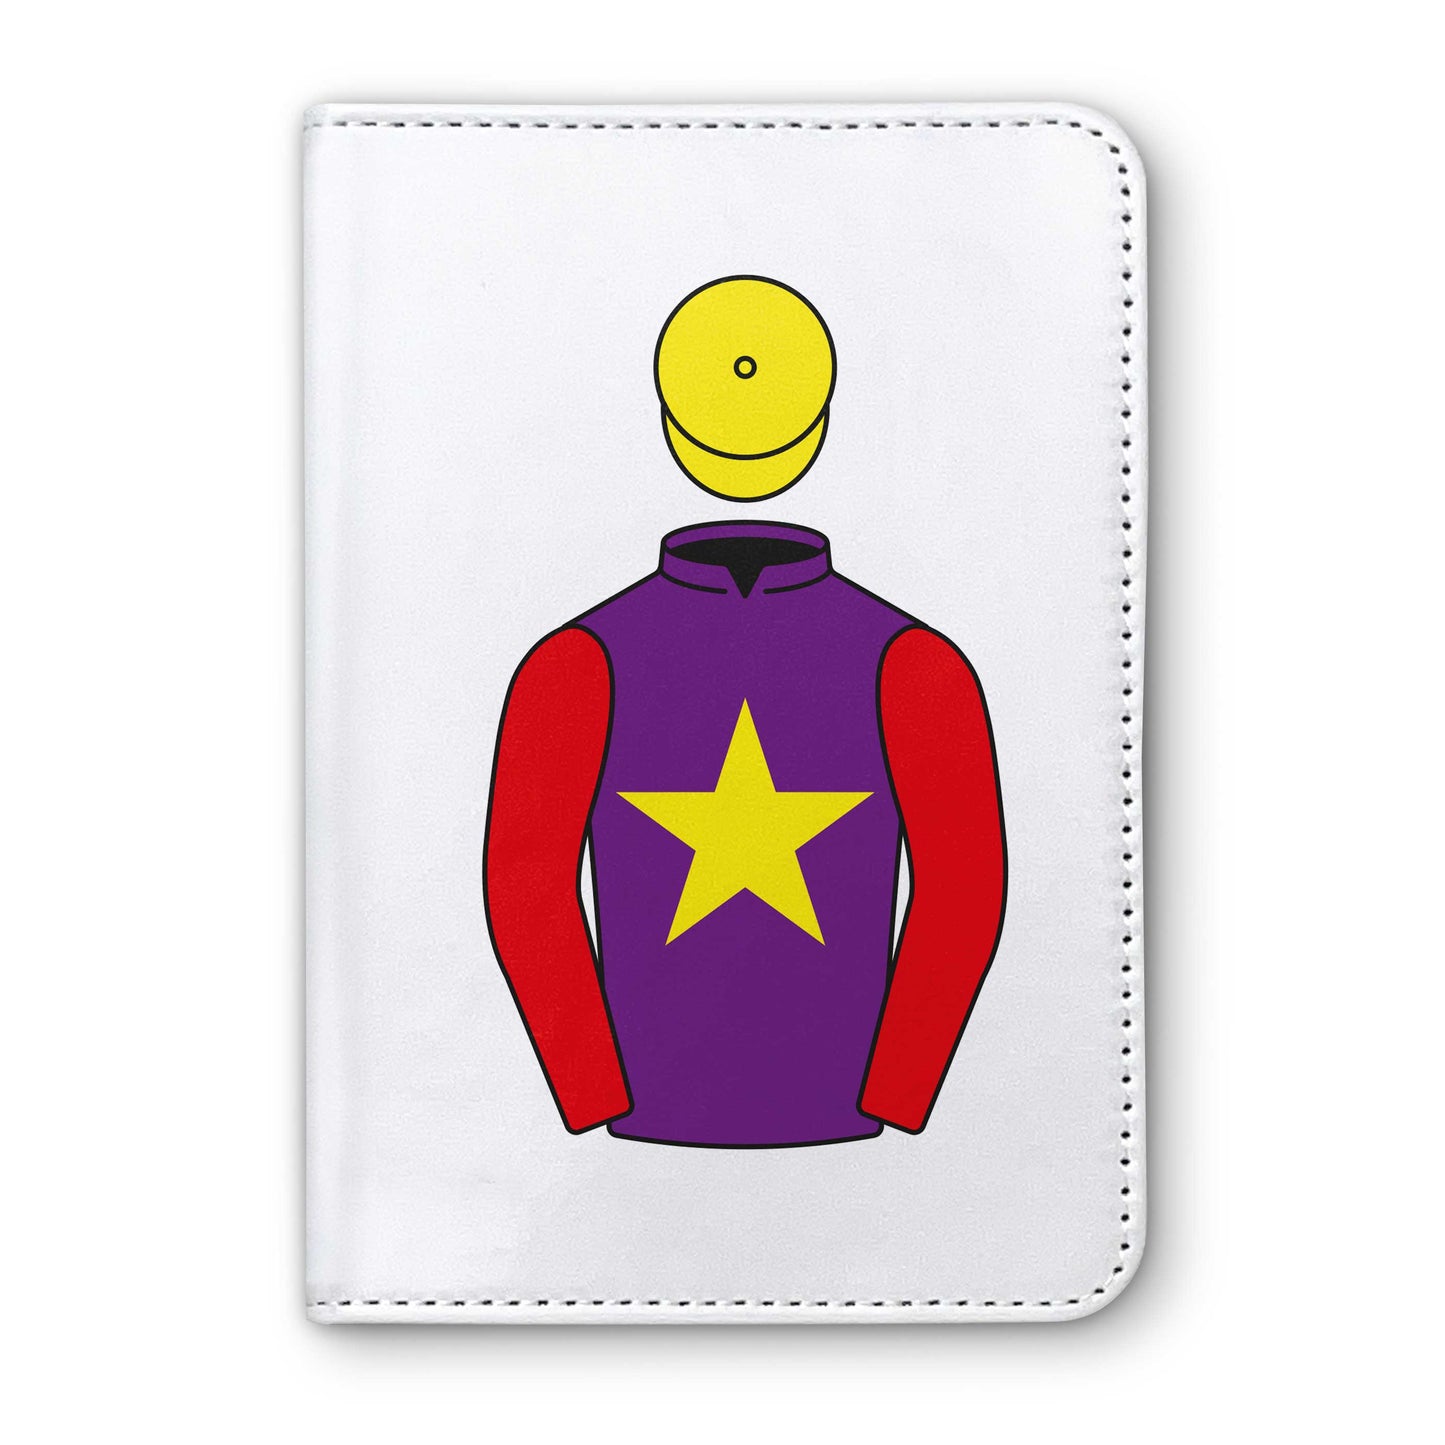 Mrs B Tully and R Lock Horse Racing Passport Holder - Hacked Up Horse Racing Gifts